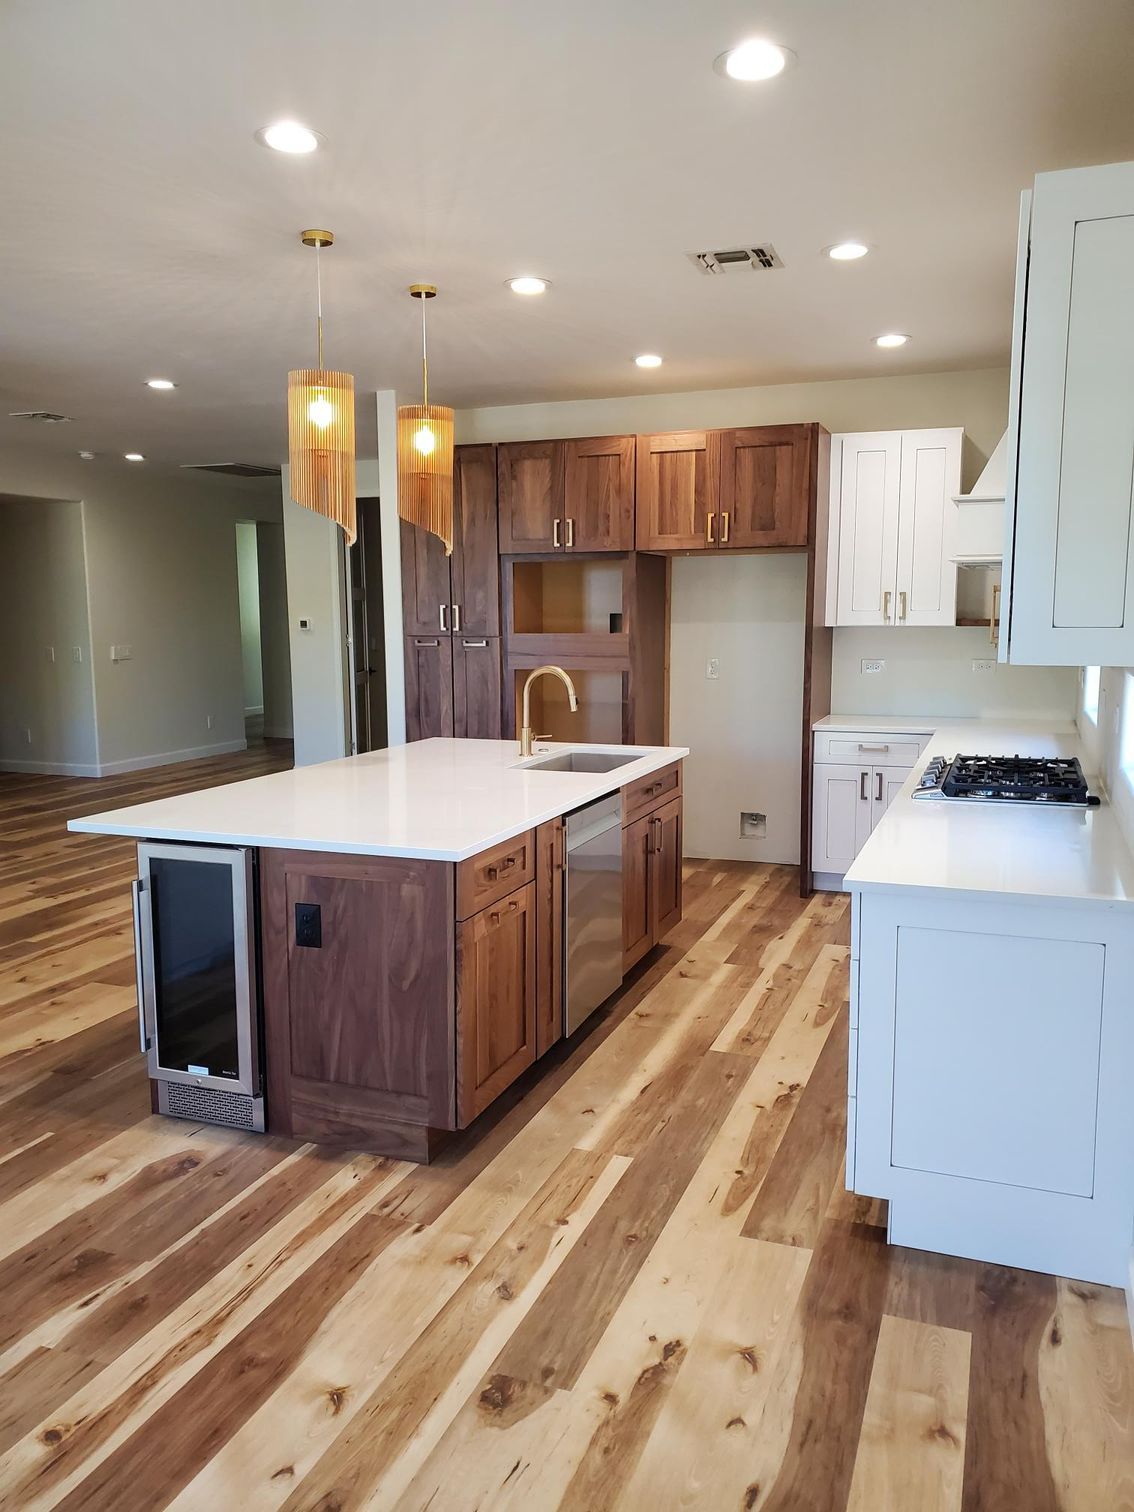 Beautifully remodeled kitchen featuring wood flooring, large white island countertop, modern pendant